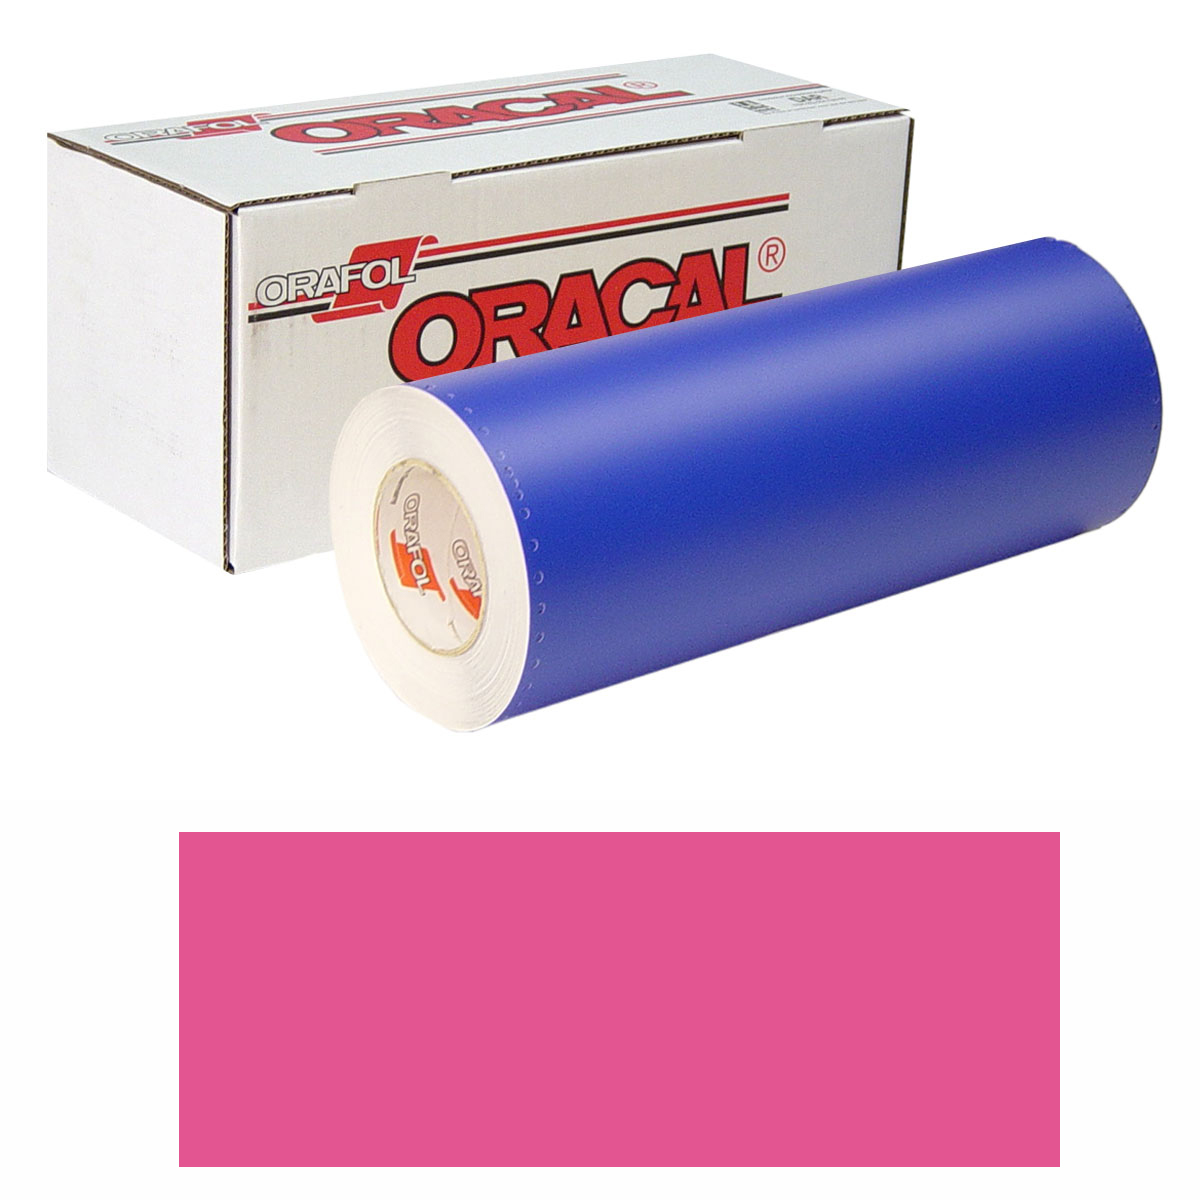 ORACAL 8300 30in X 10yd 041 Pink